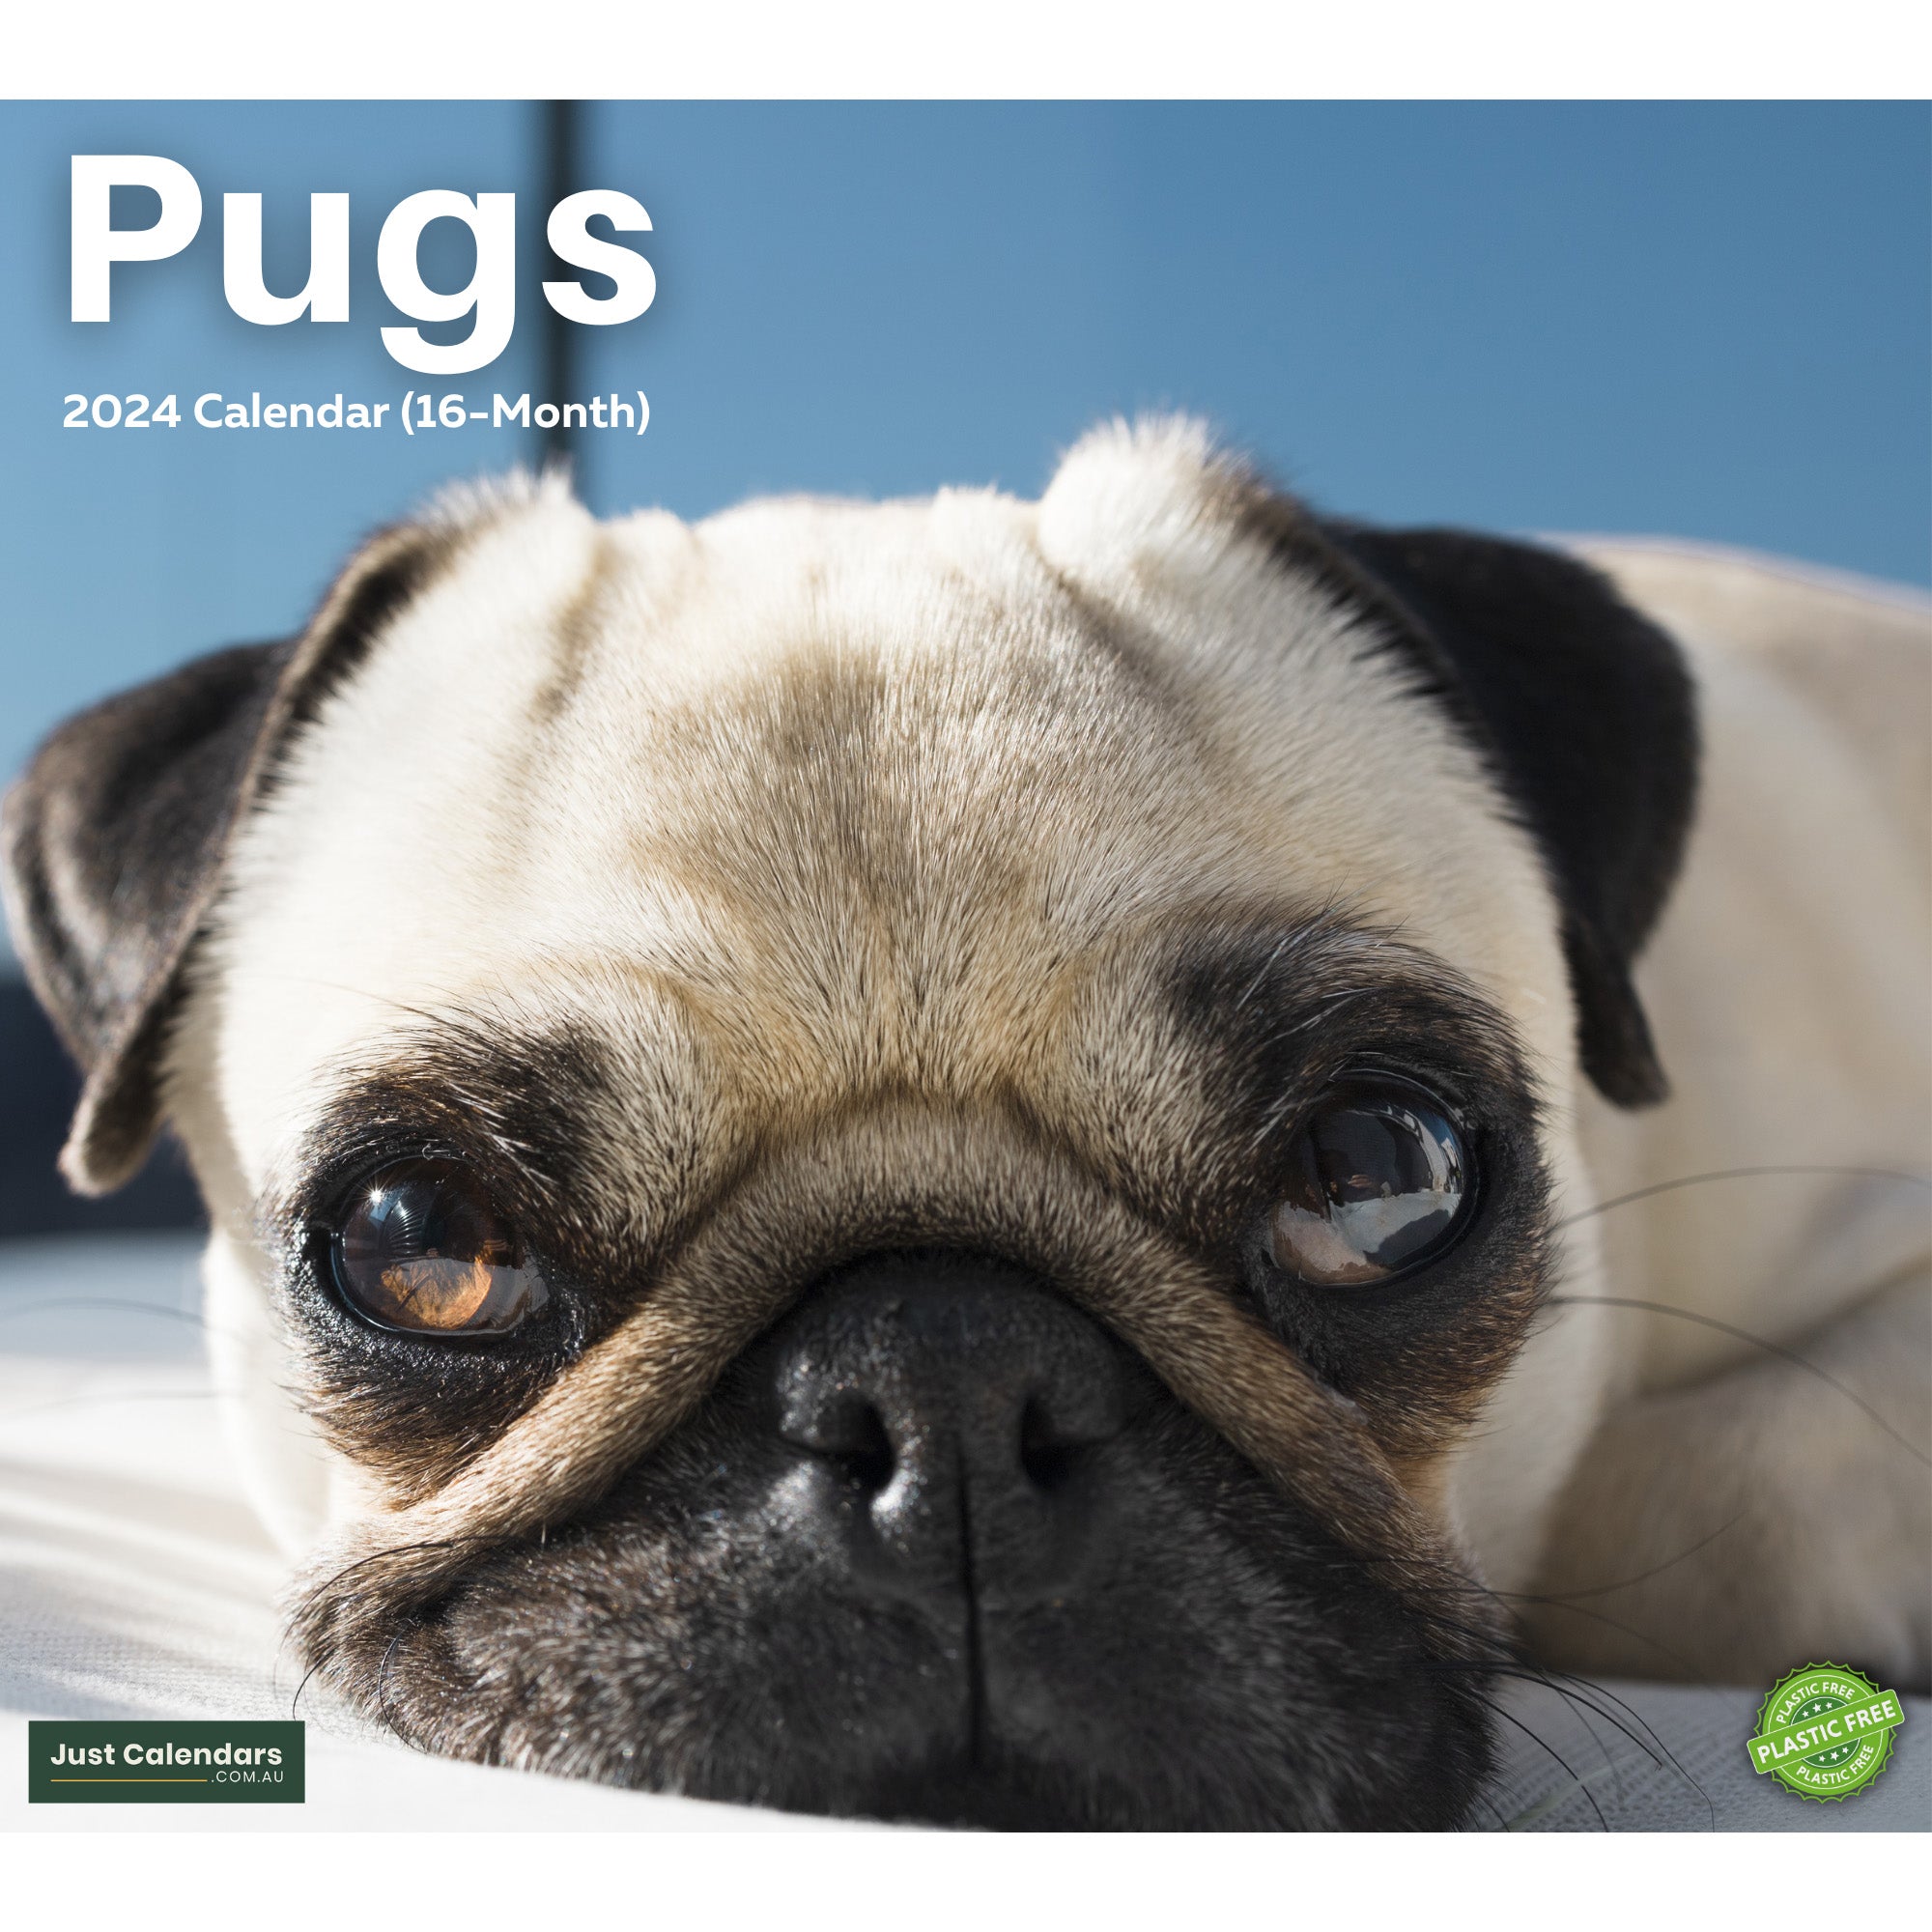 2024 Pugs Deluxe Wall Calendar Dogs & Puppies Calendars By Just